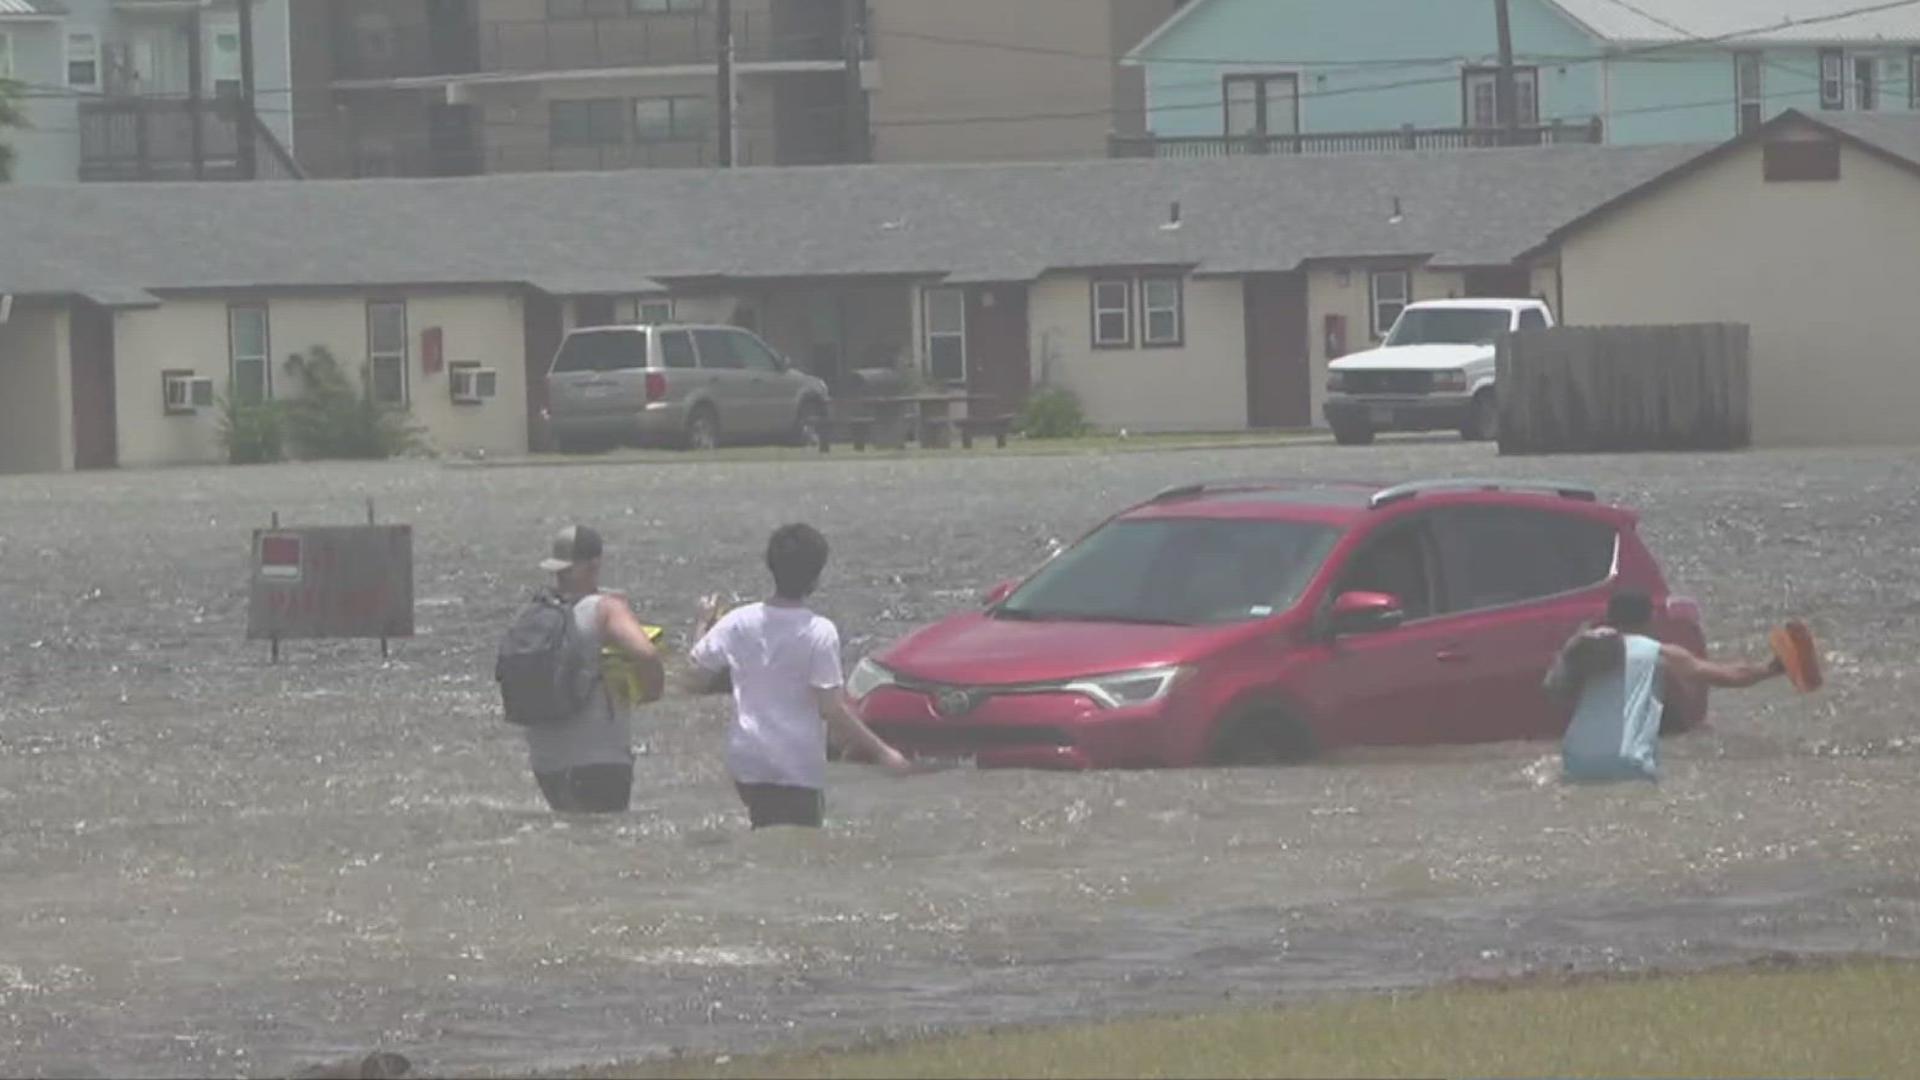 Those who chose to evacuate were taken to a temporary shelter at the Corpus Christi Gym.